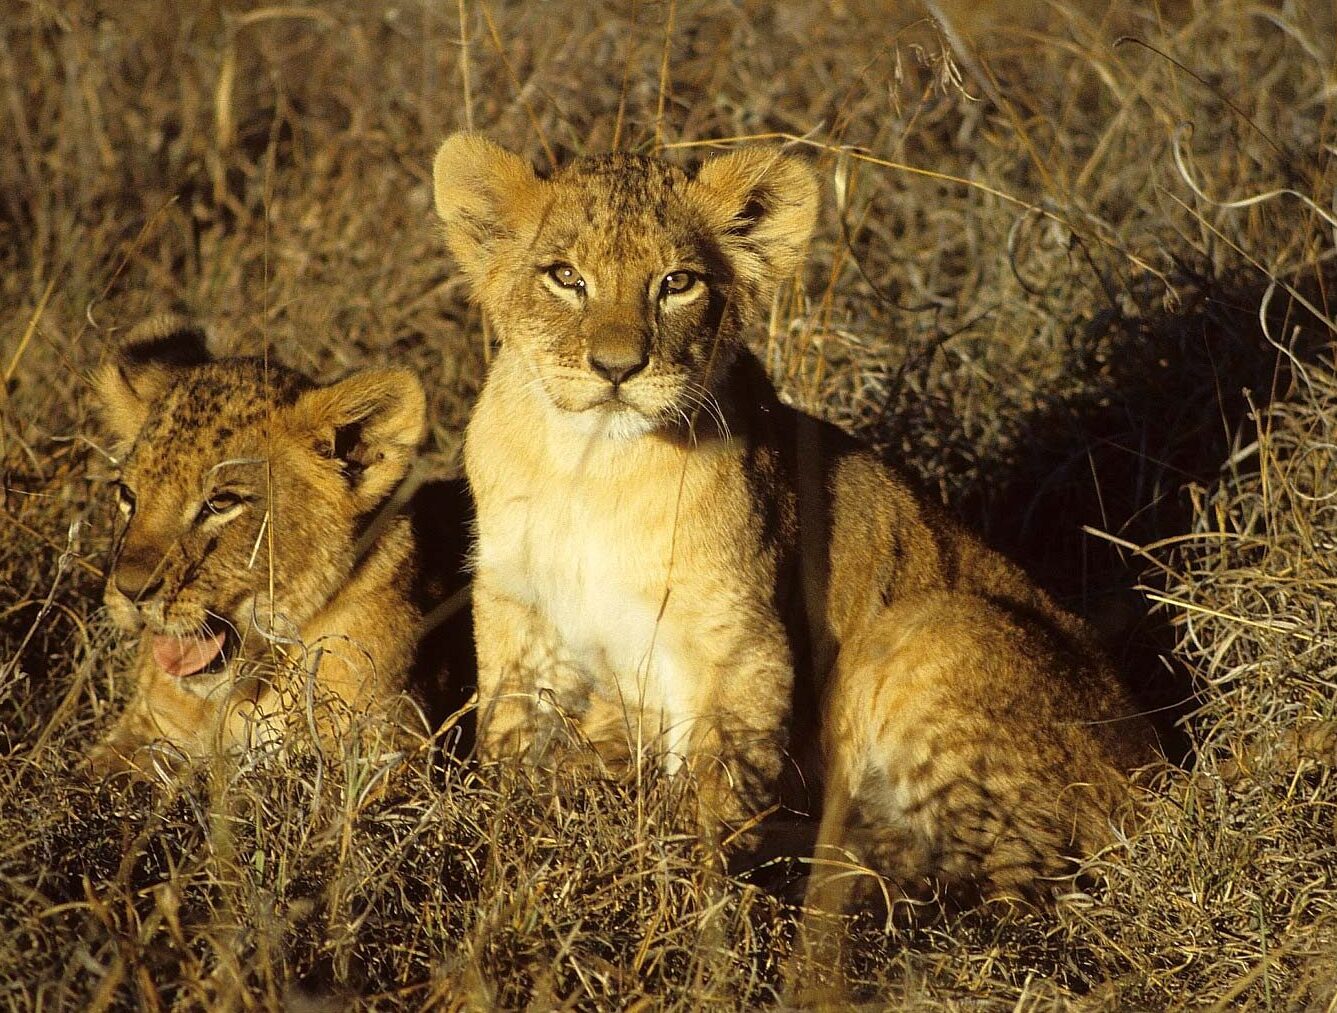 Two lion cubs sit in the grass